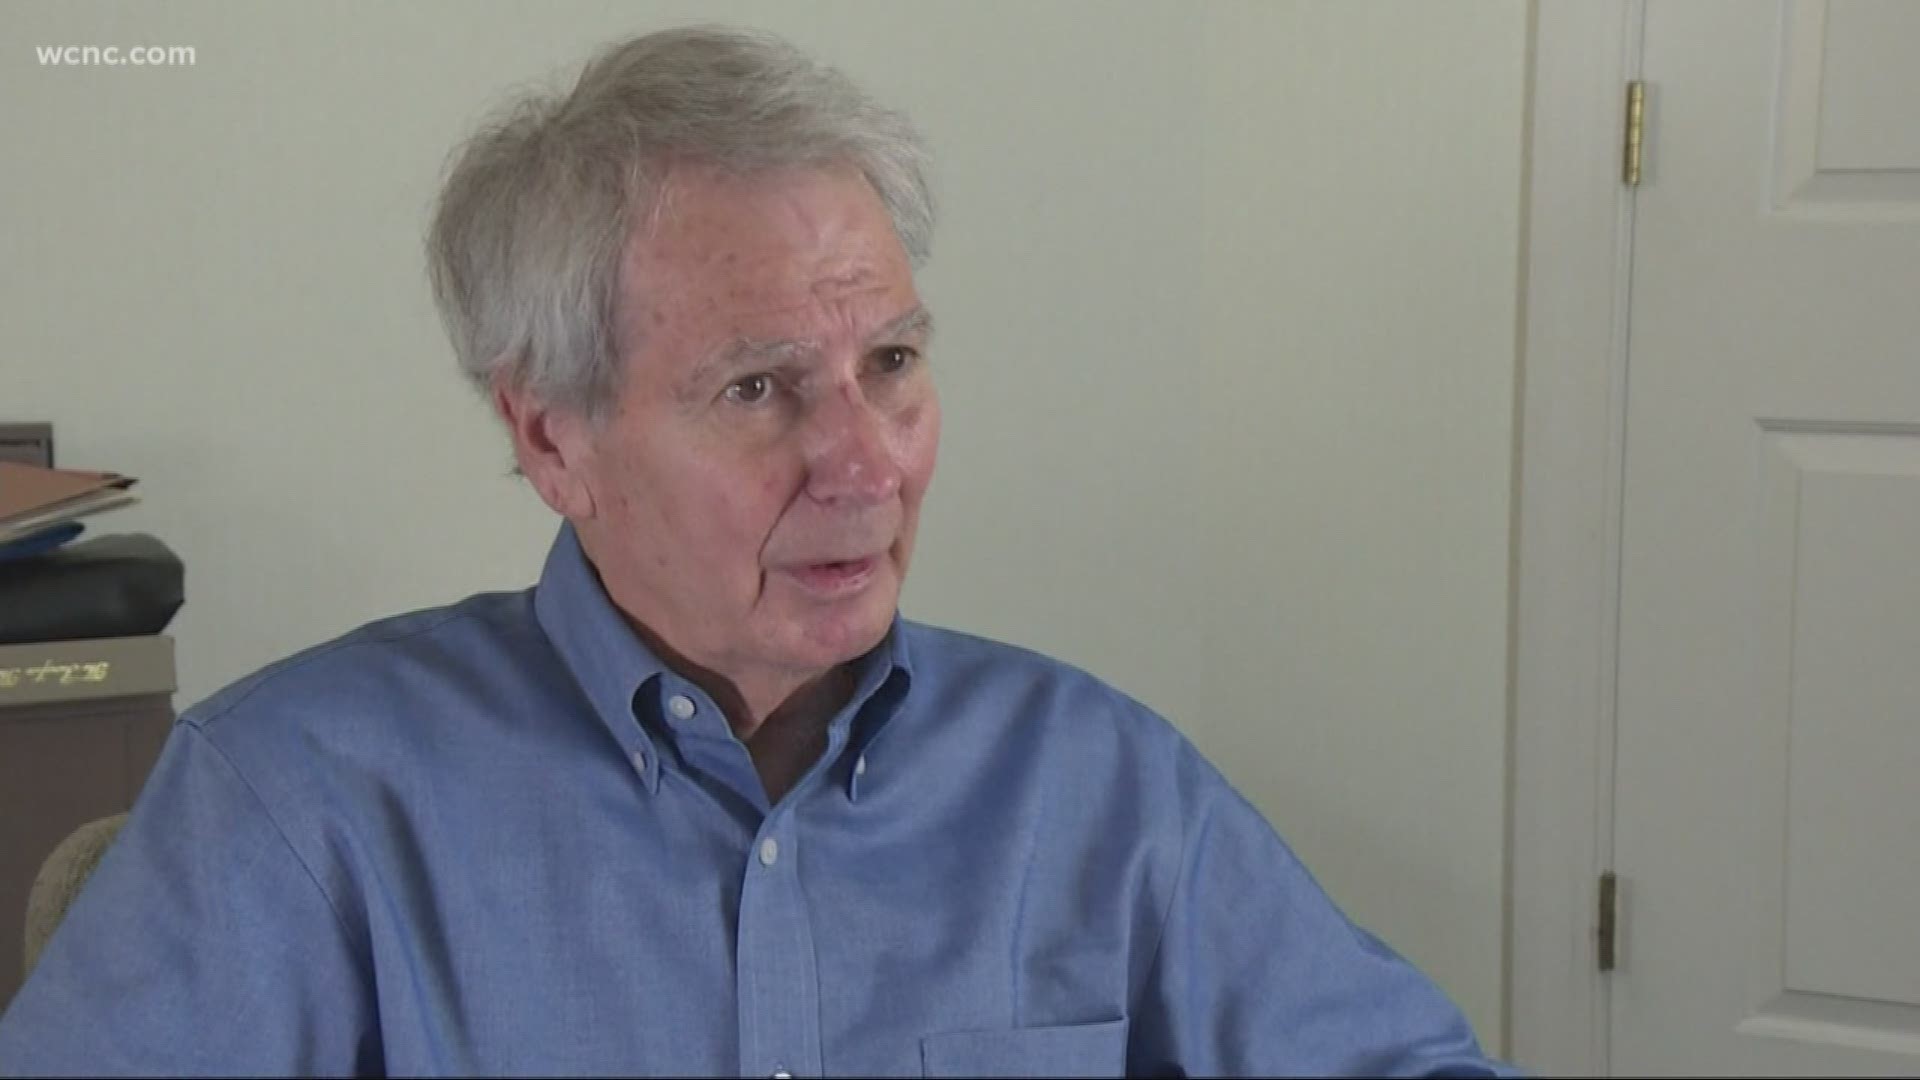 North Carolina Congressman Walter Jones has passed away. We learned last month that Jones was in hospice and had been battling an undisclosed illness since the fall.